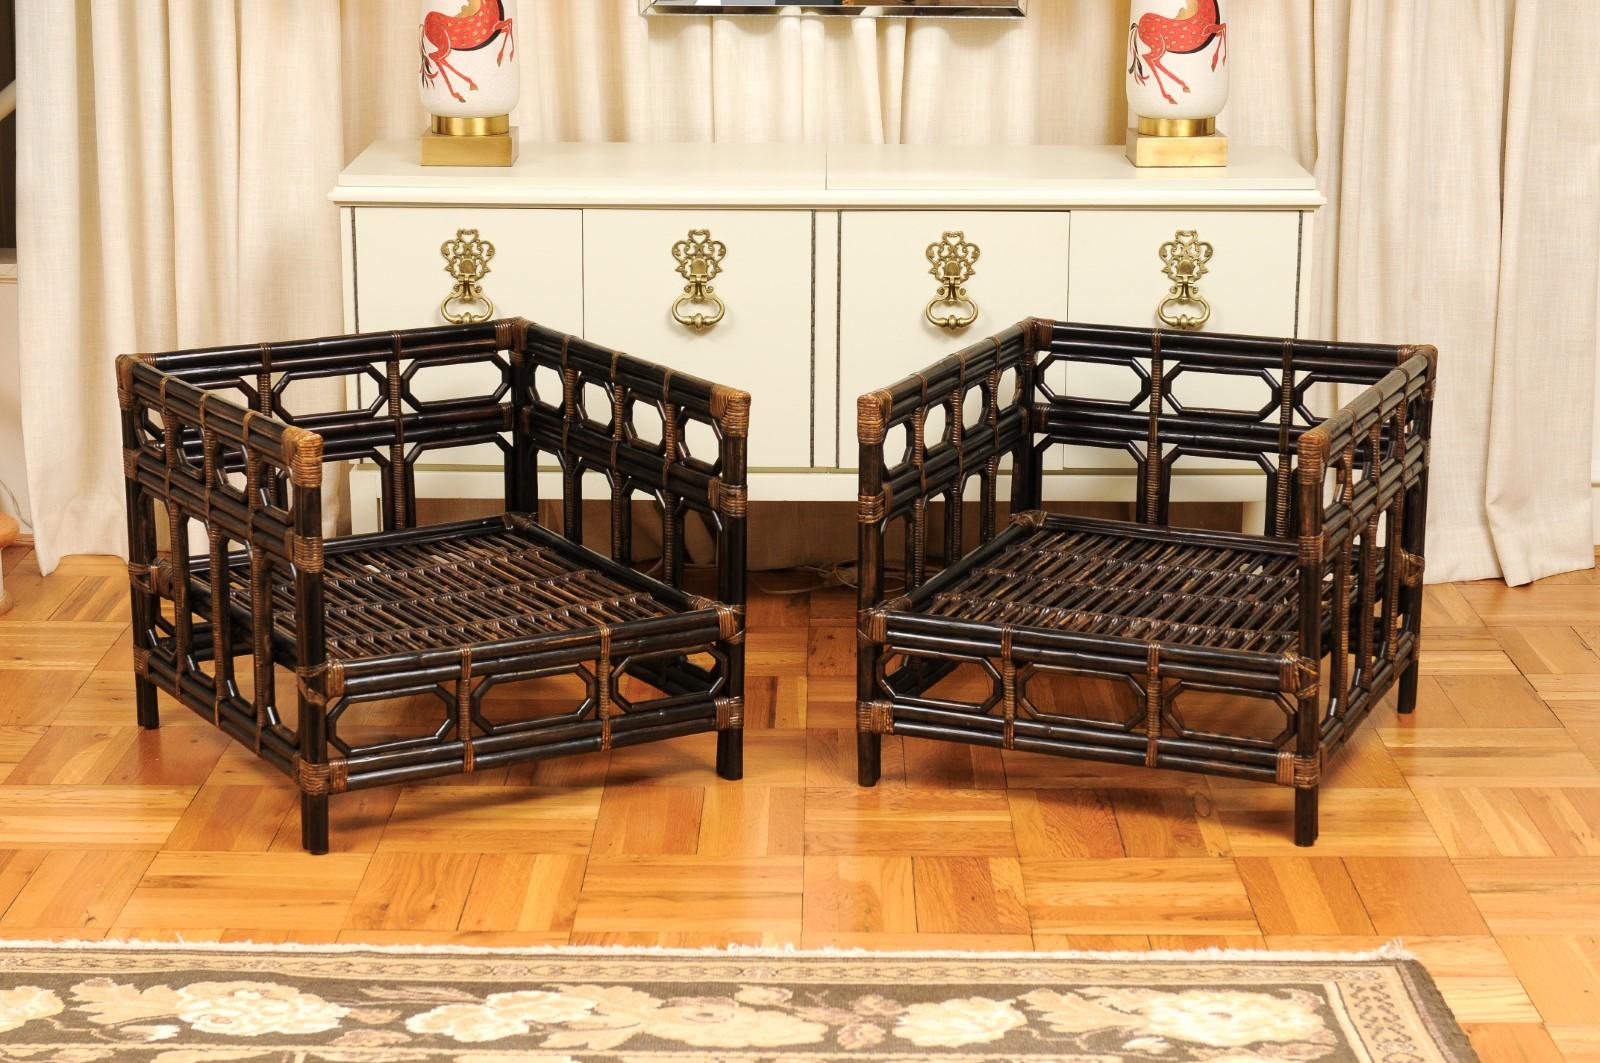 Incredible Pair of Cordovan Tortoiseshell Emperor's Cube Loungers, circa 1970 For Sale 5